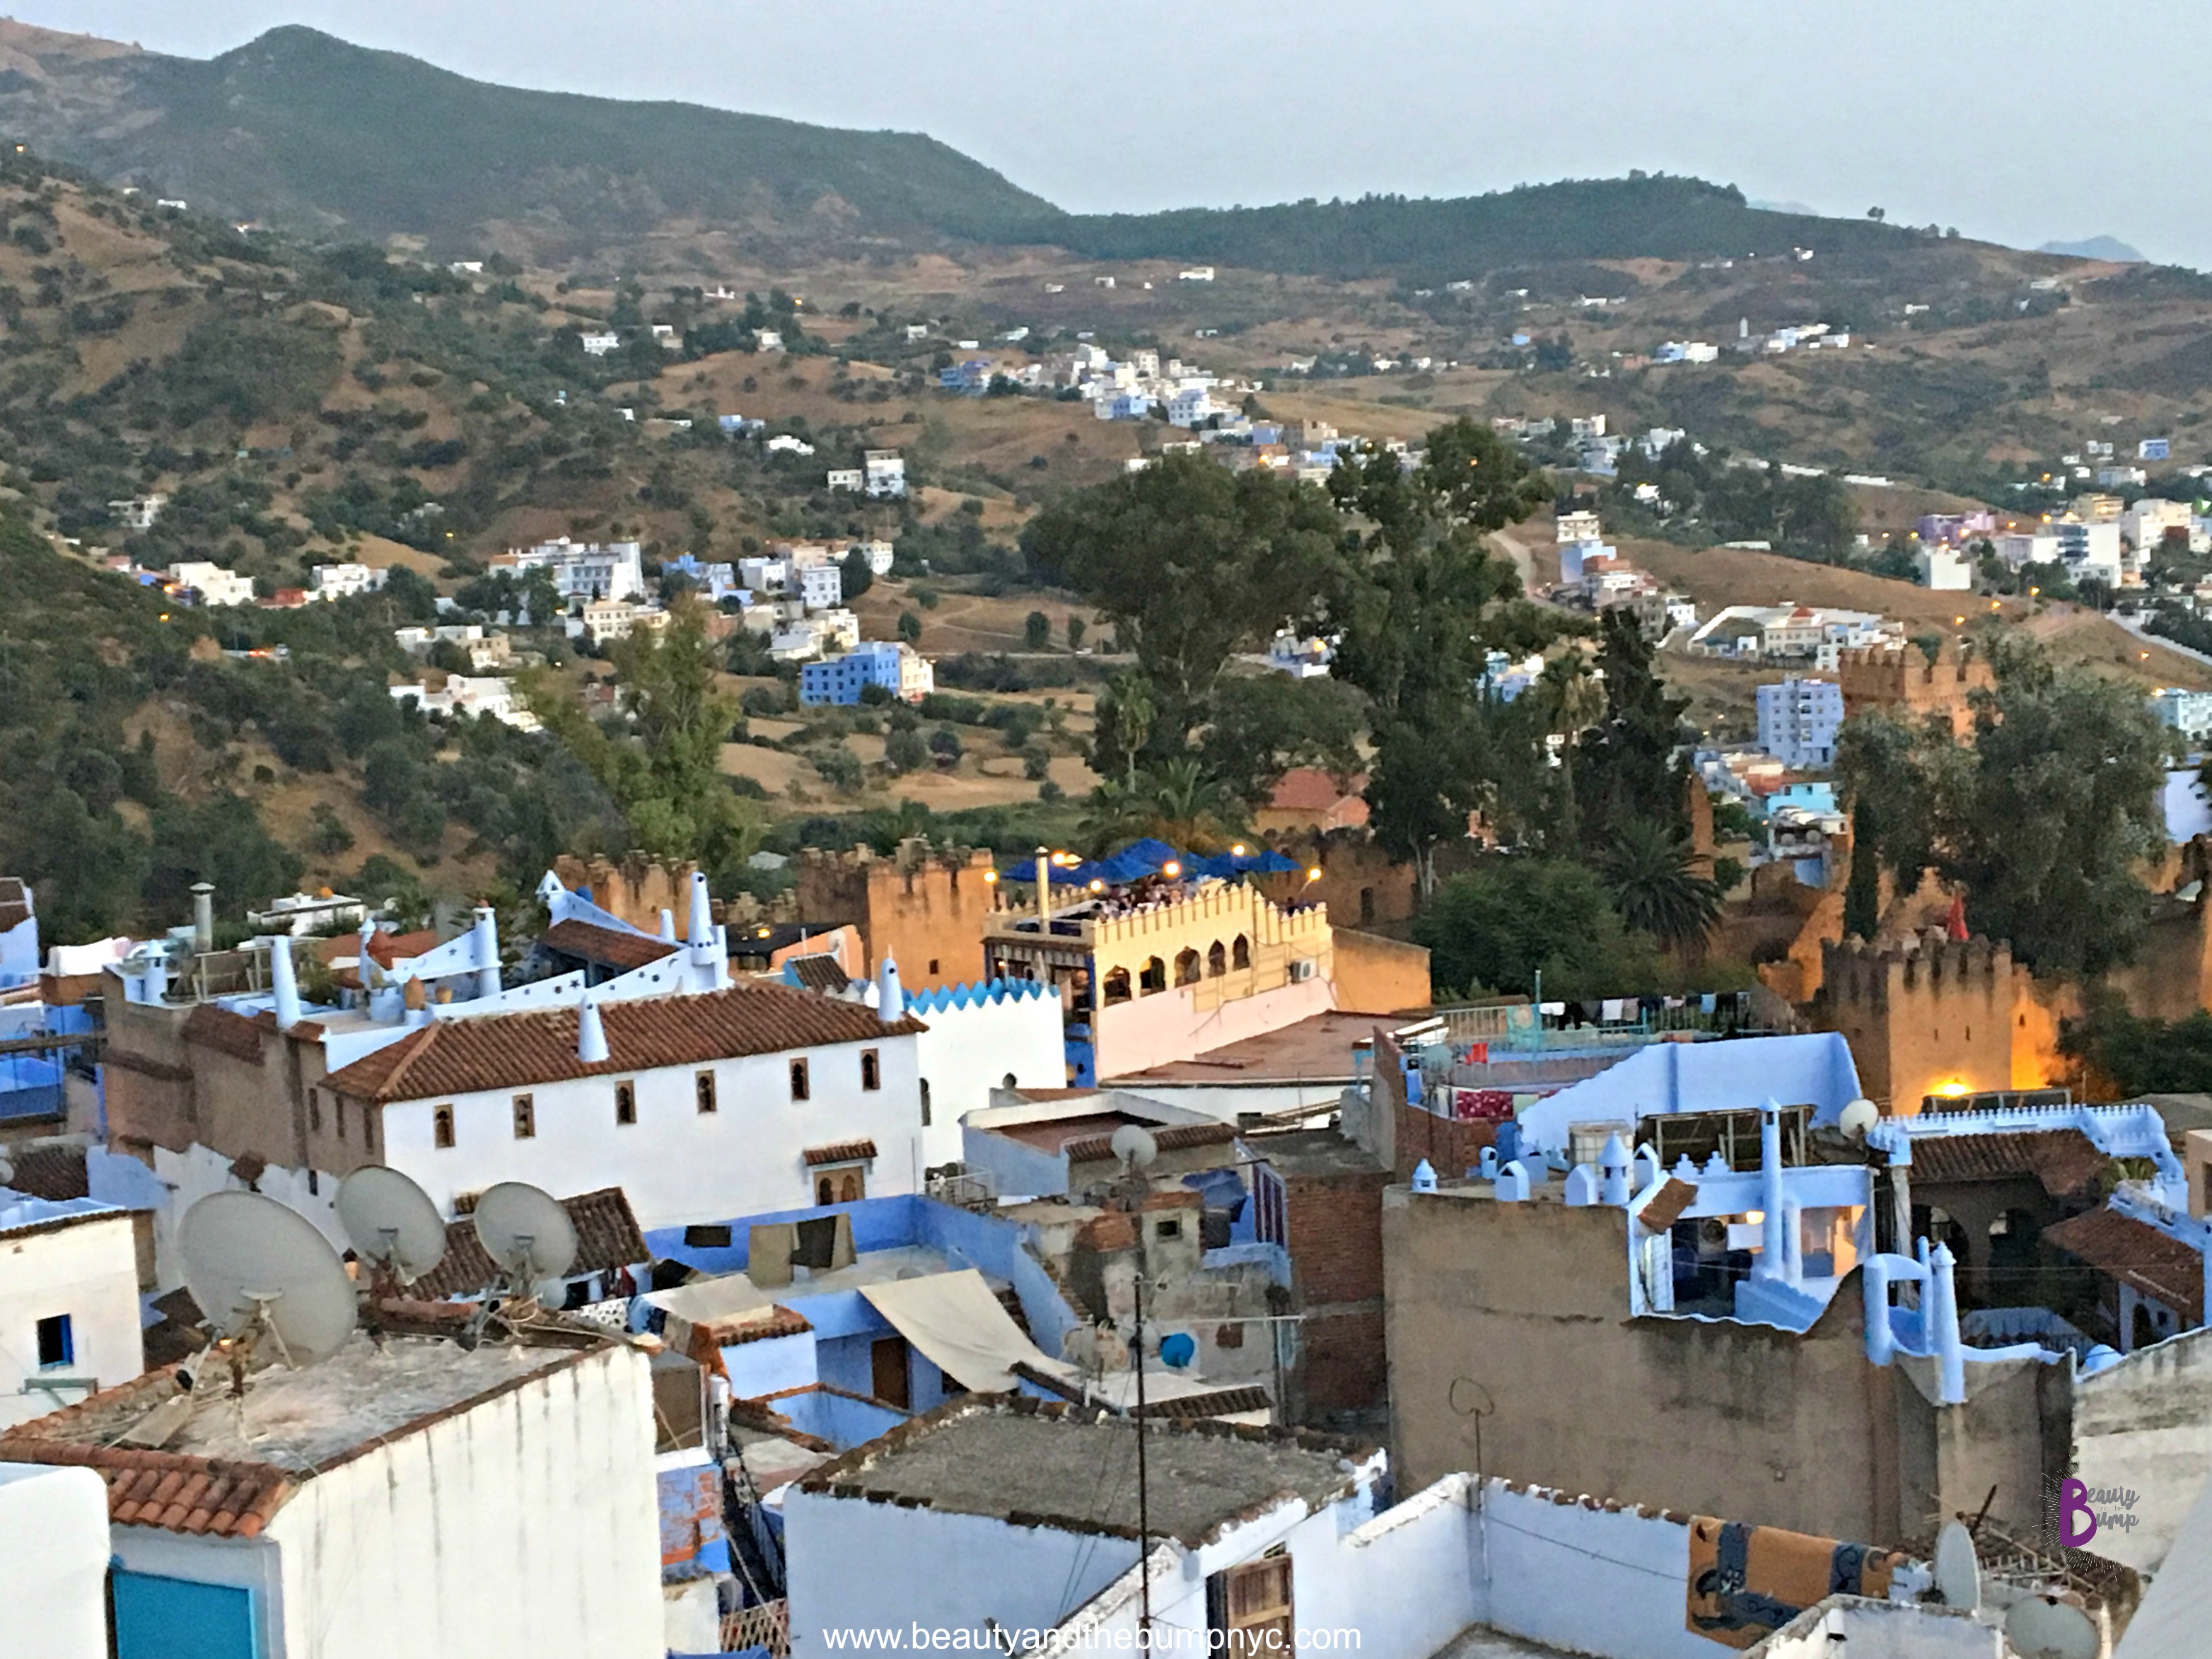 Views of Chefchaouen Rif Mountains from Lina Ryad